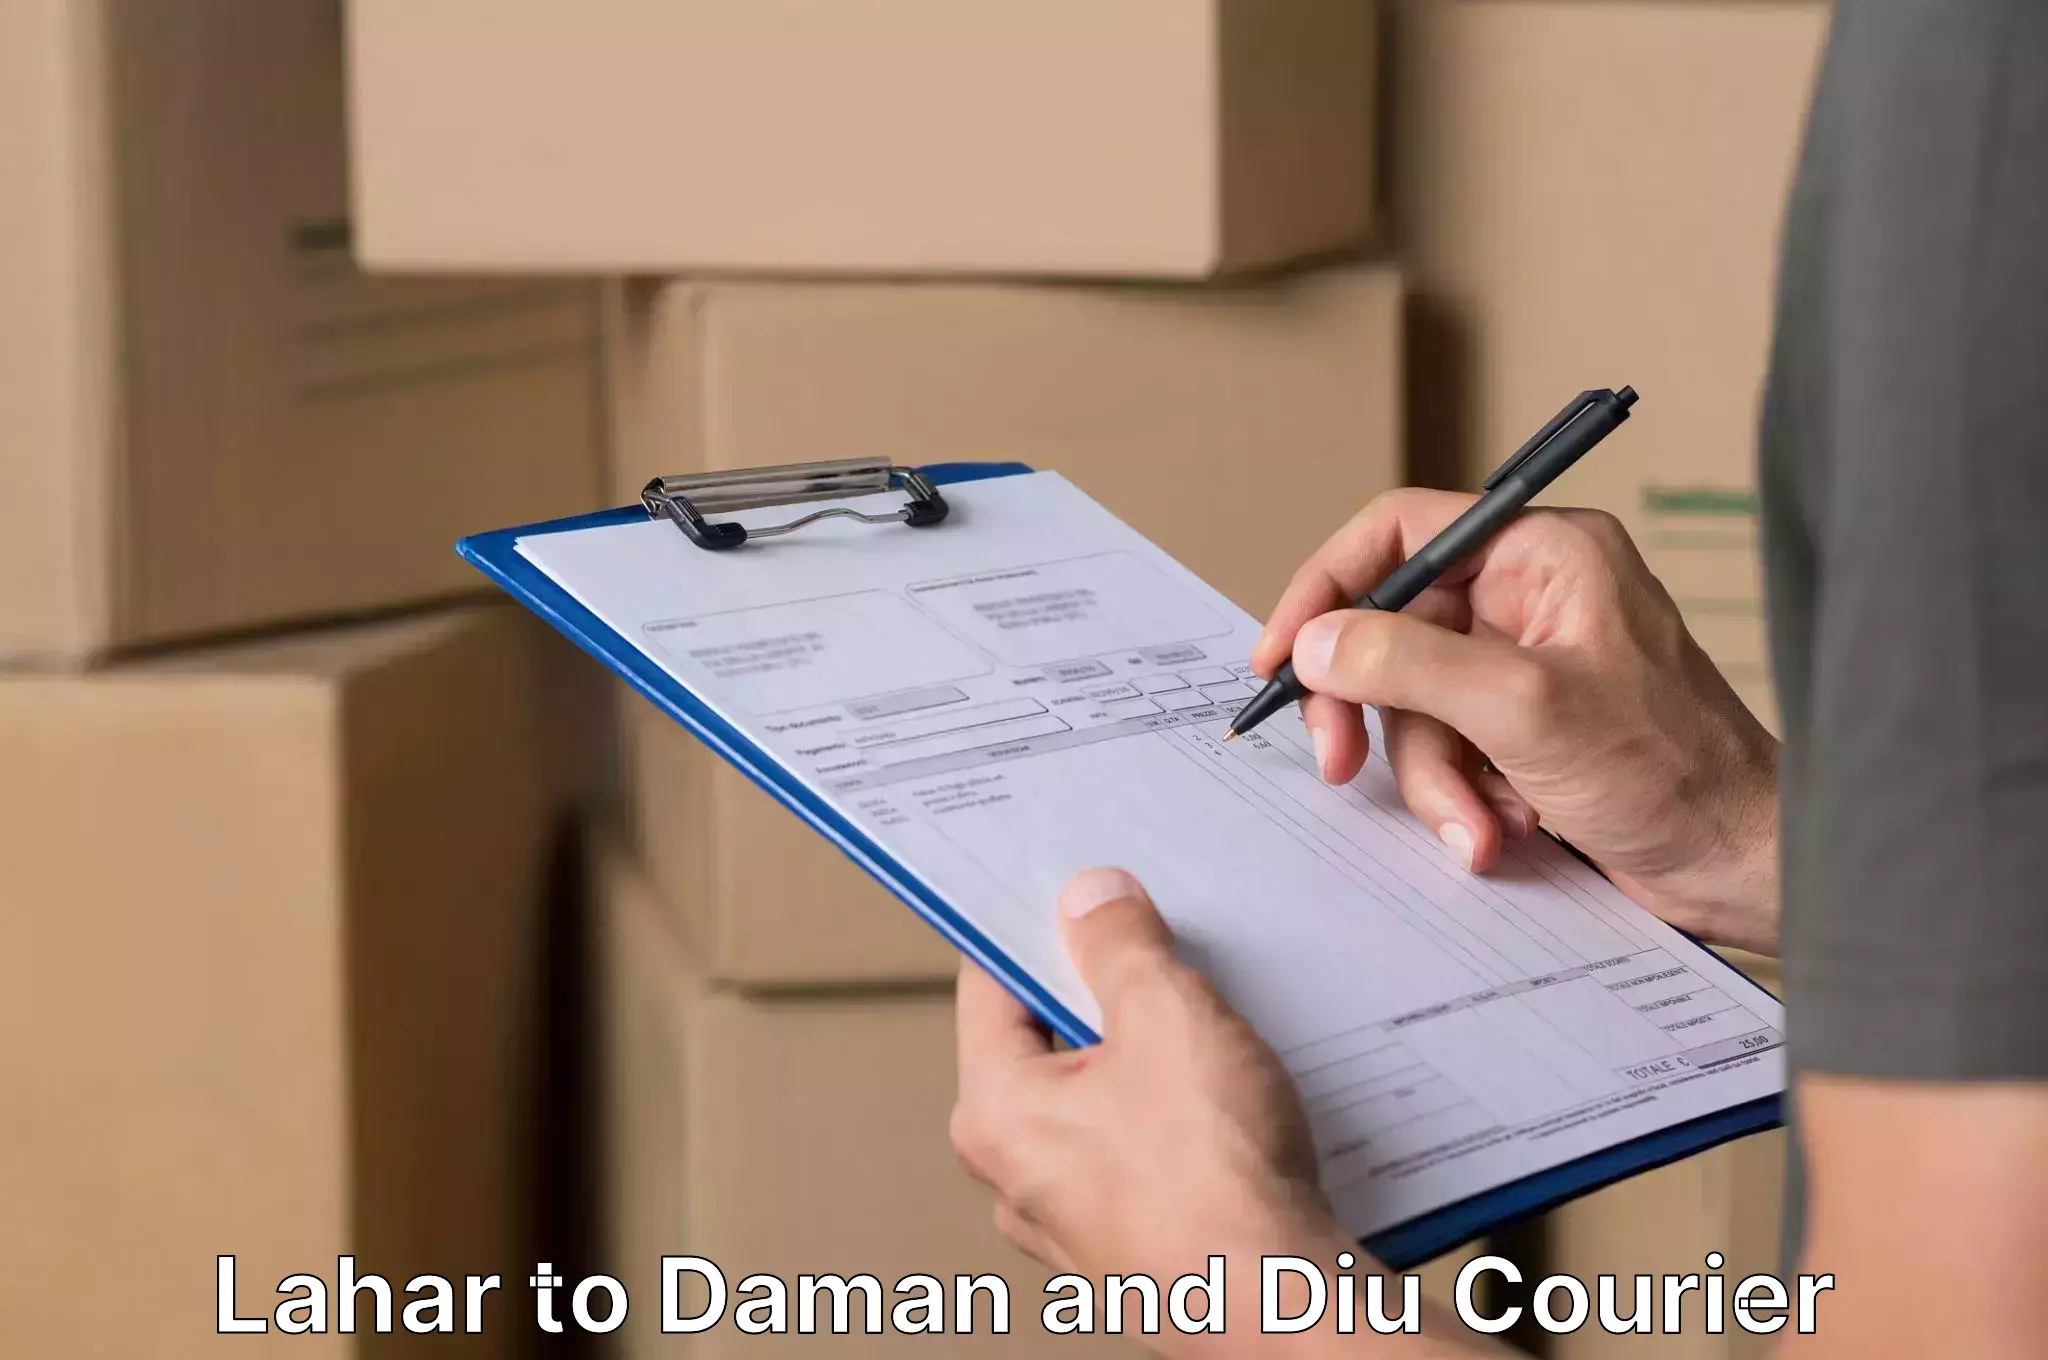 Full-service movers Lahar to Daman